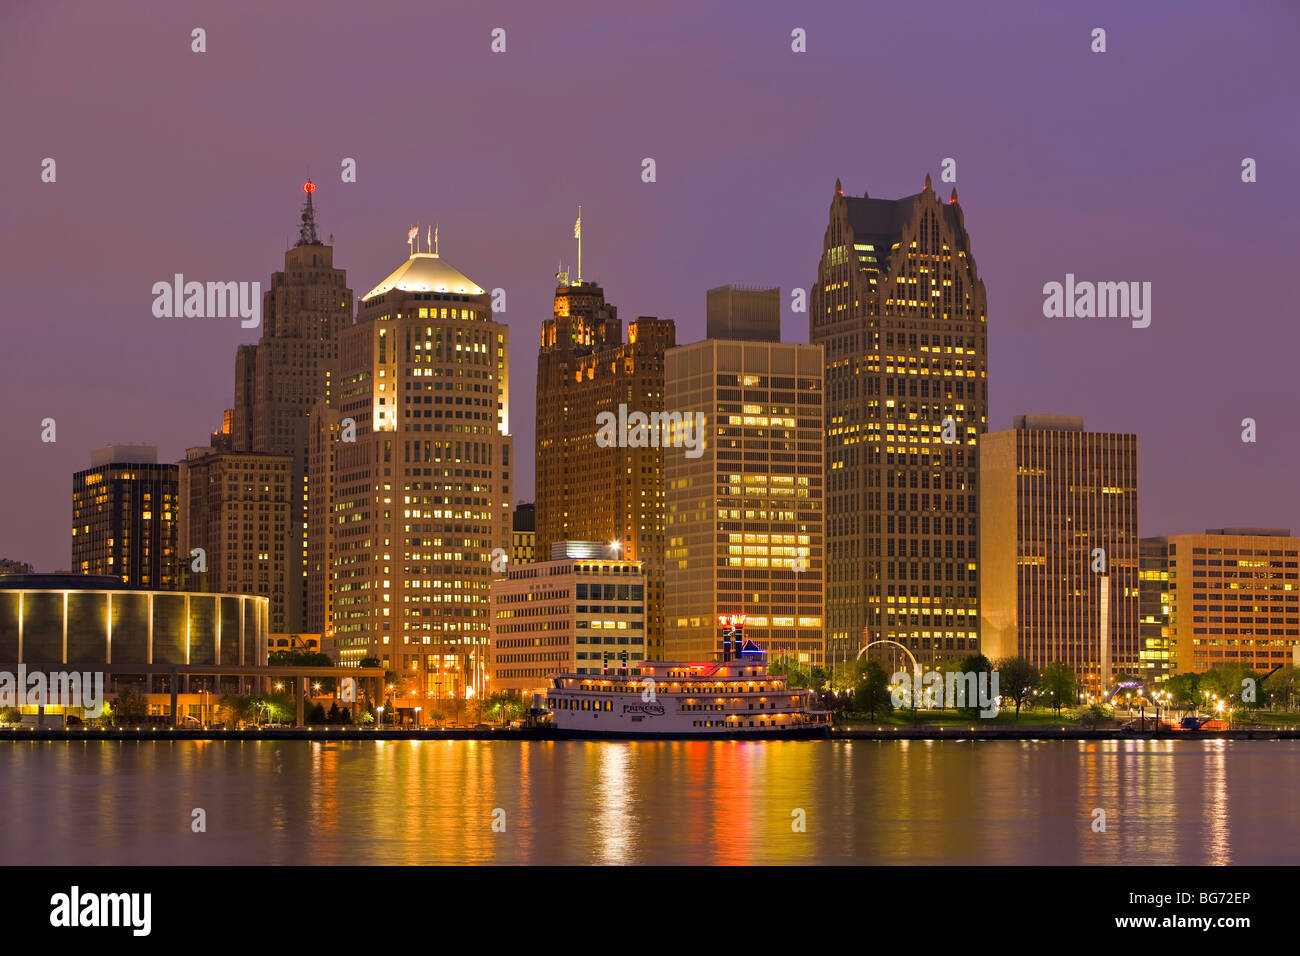 Skyline of Detroit city, Michigan, USA at dusk seen from the waterfront in the city of Windsor, Ontario, Canada. Stock Photo